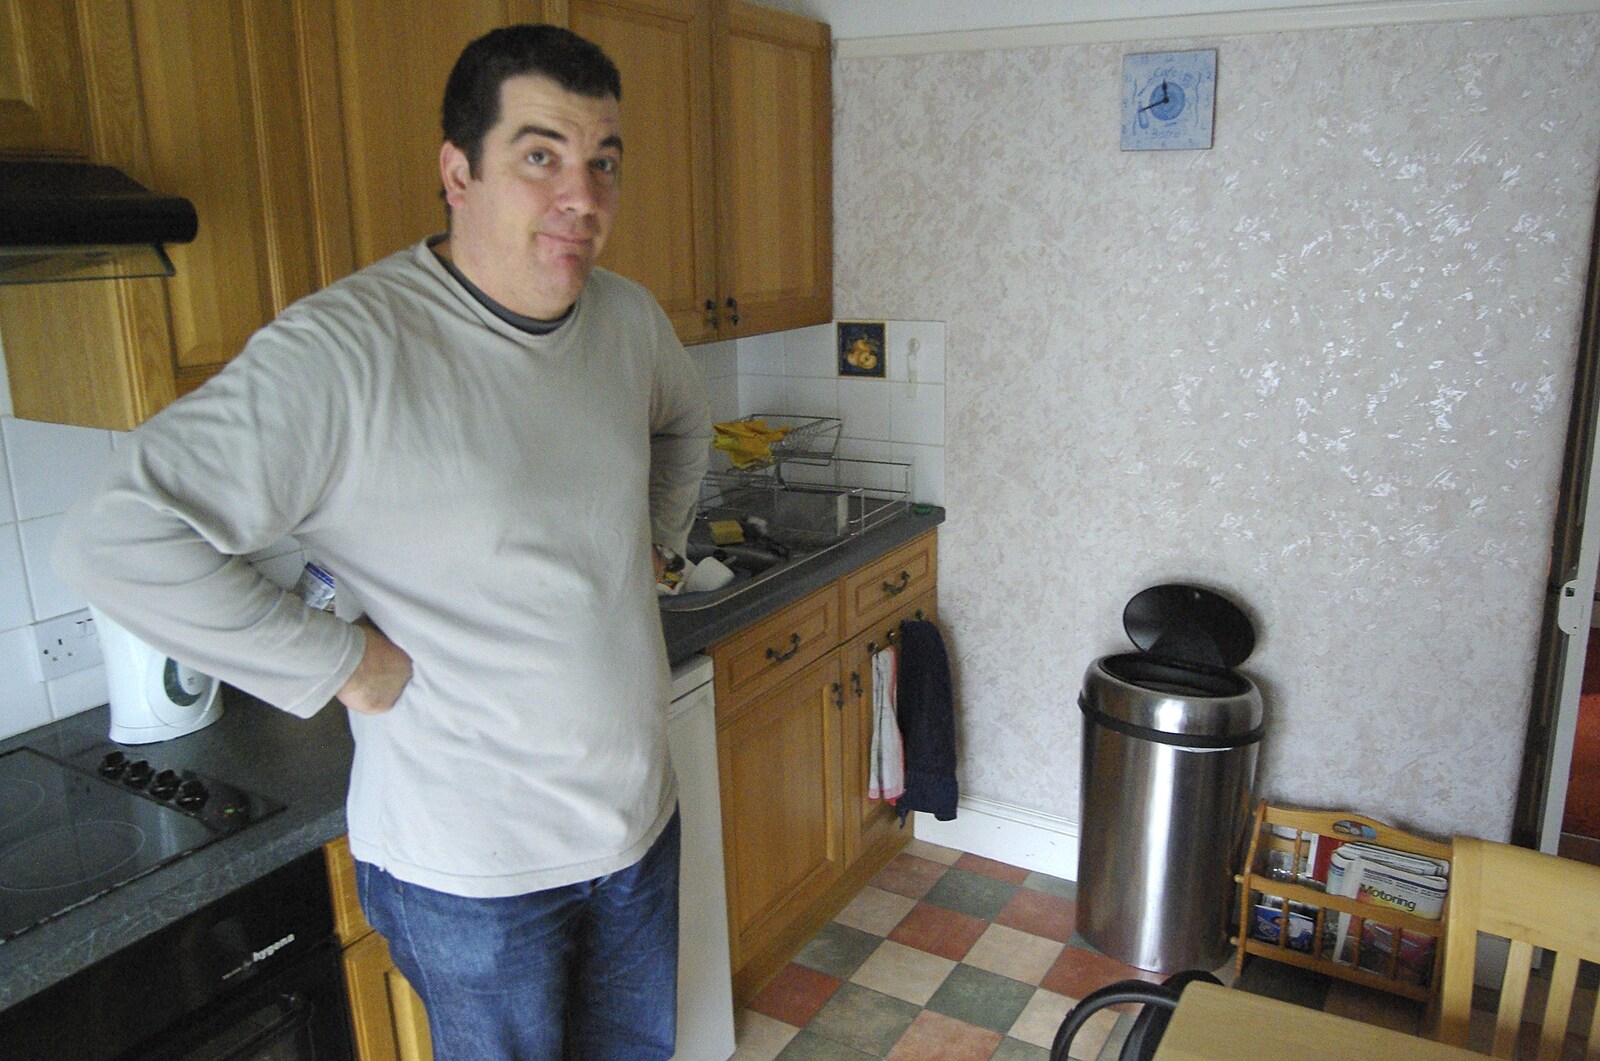 A Trip to New Milton and Barton-on-Sea, Hampshire - 27th November 2008: Jon in his parent's upstairs flat